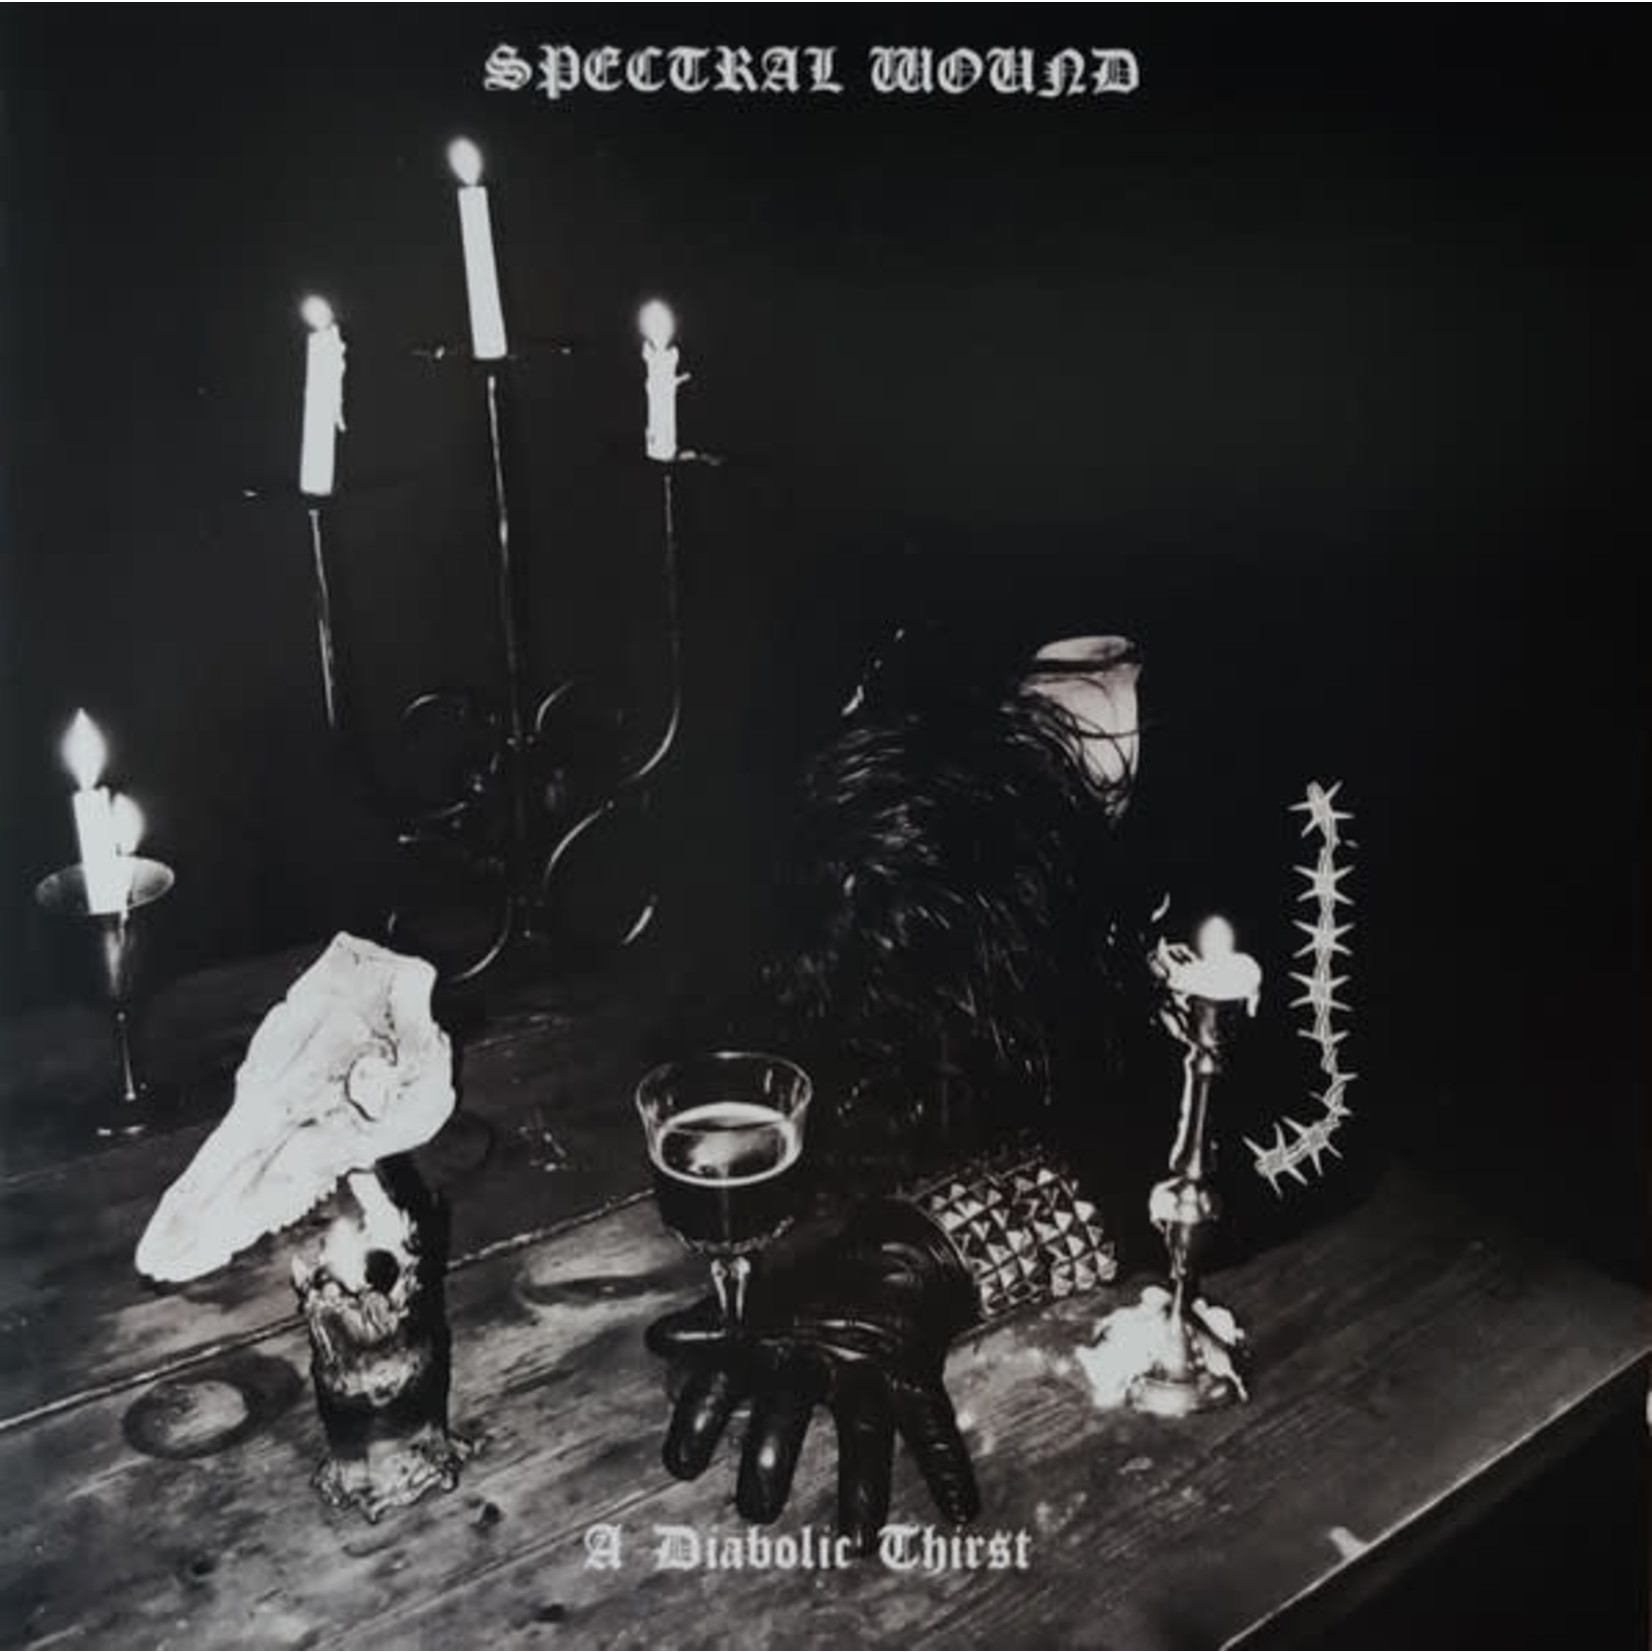 [New] Spectral Wound - A Diabolic Thirst